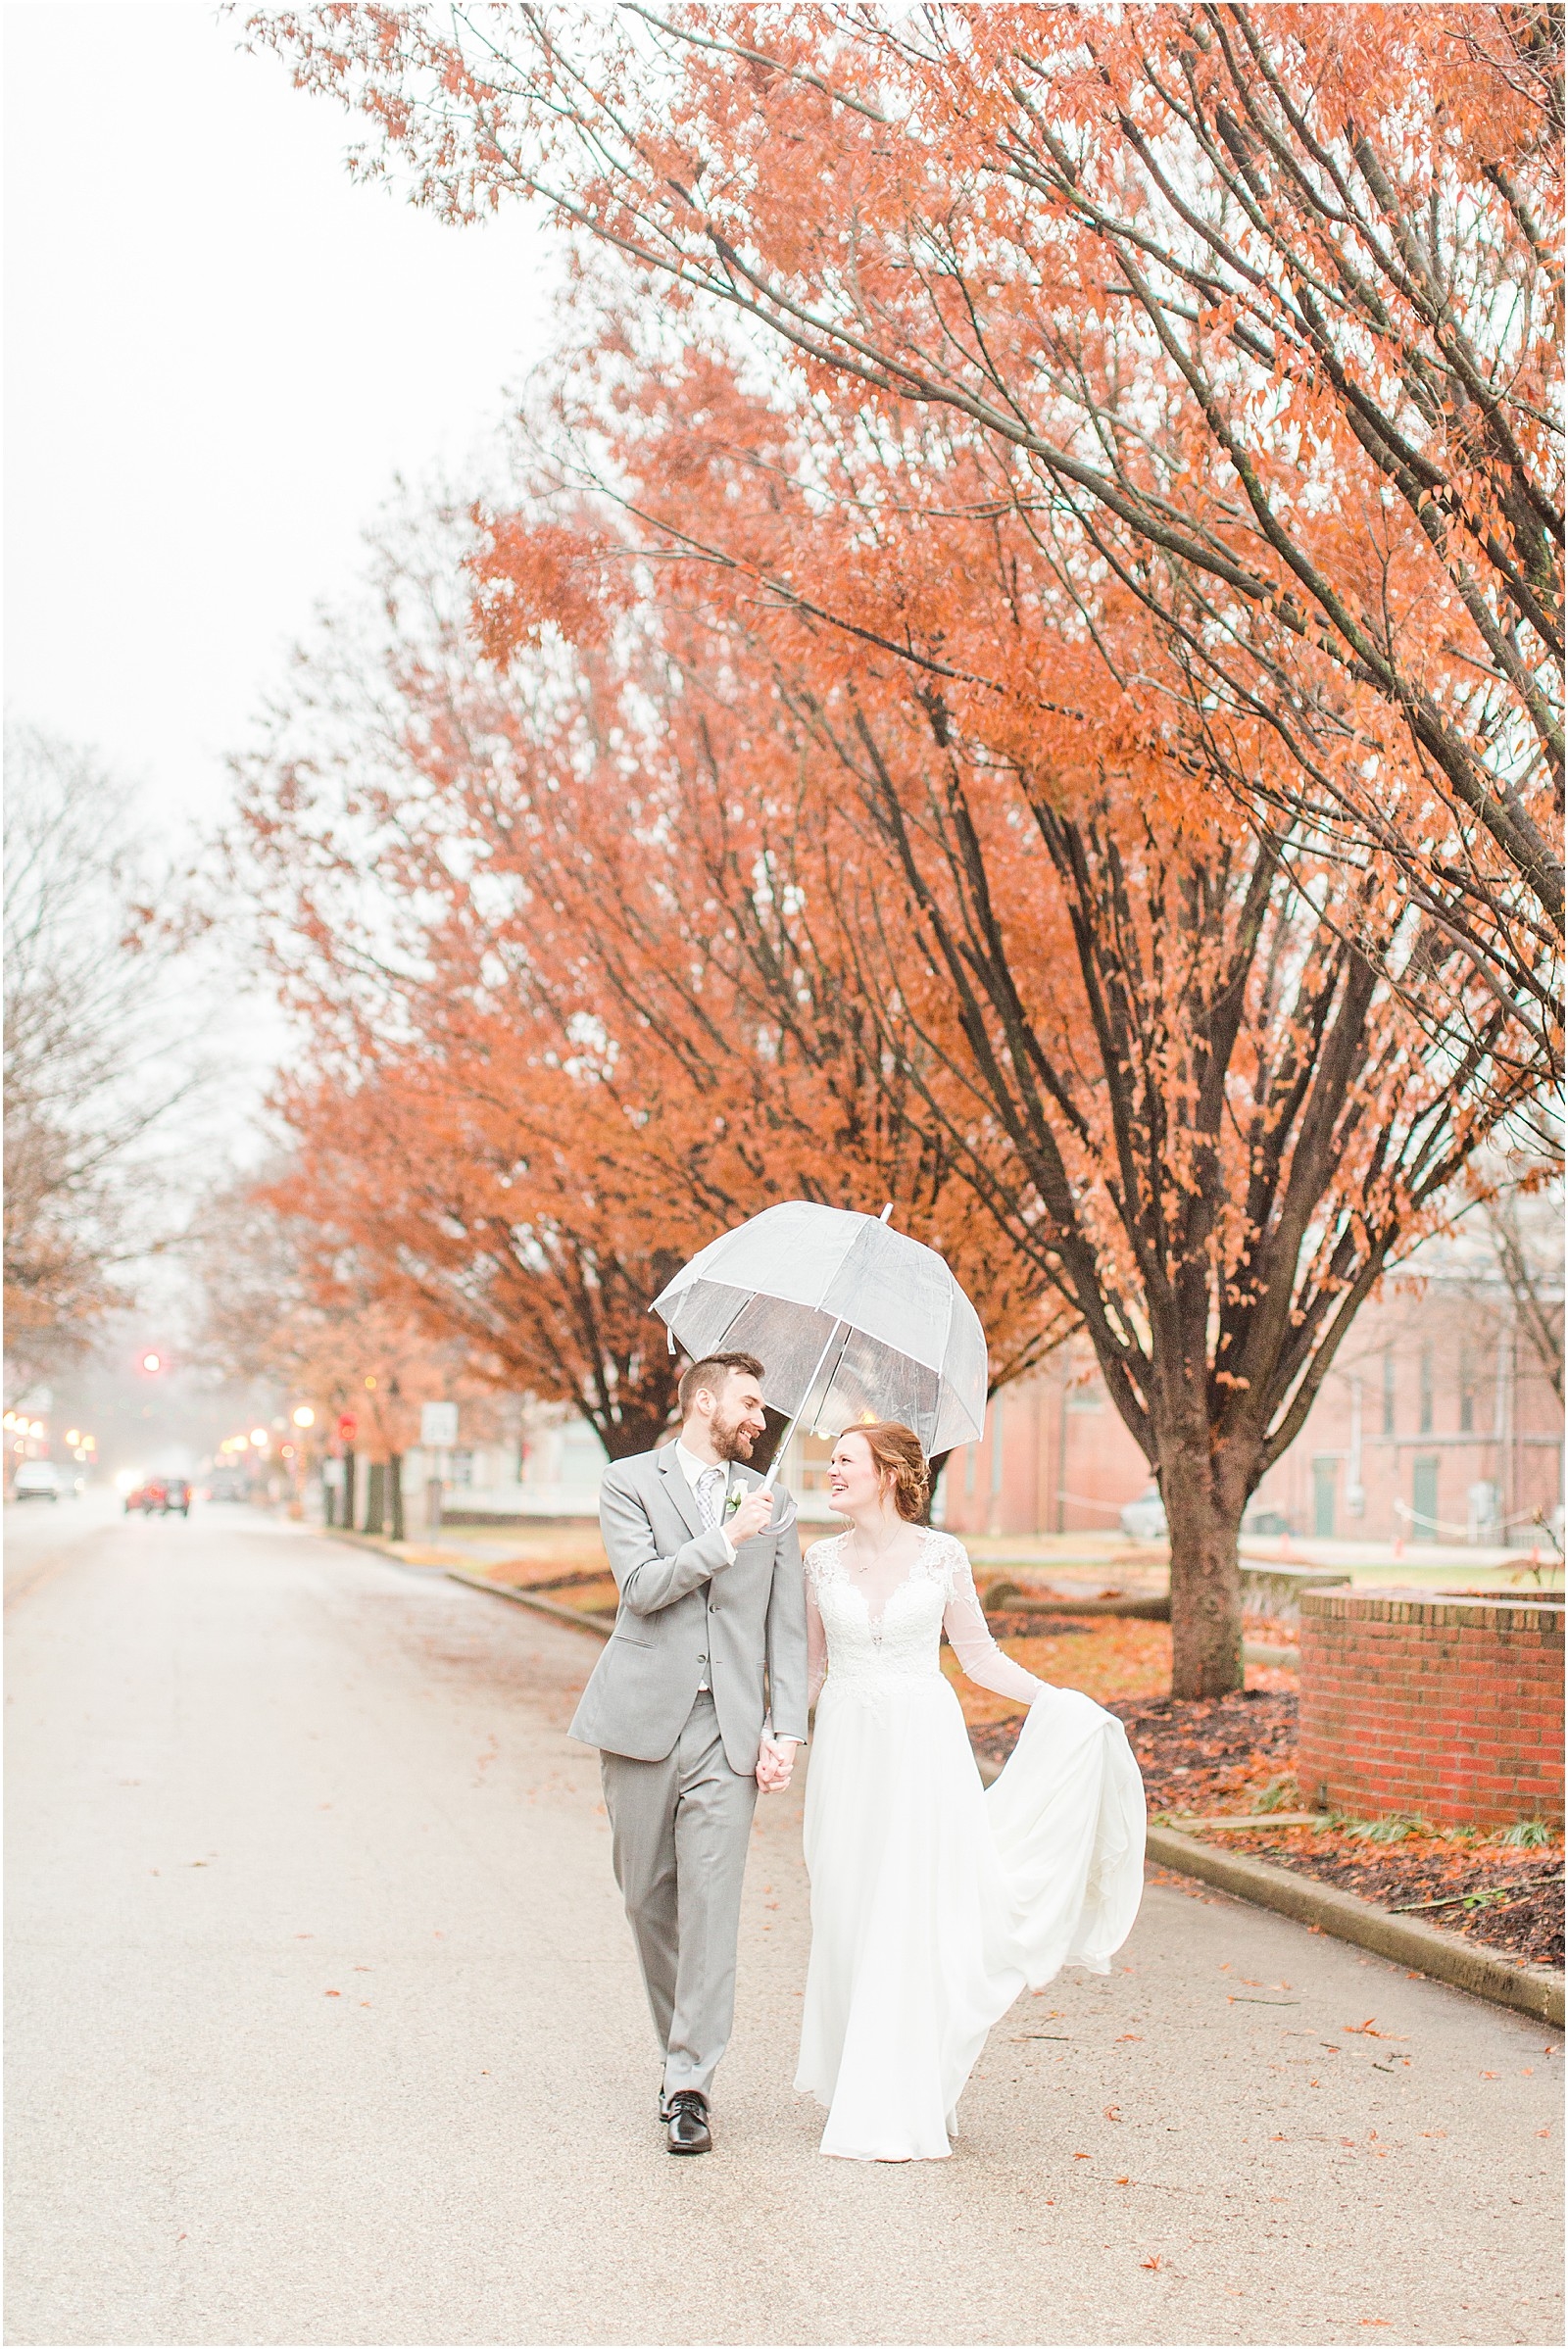 Amy and Logan | A Rainy New Harmony Indiana wedding | Bret and BRandie Photography | Bret and Brandie Photography | 0071.jpg